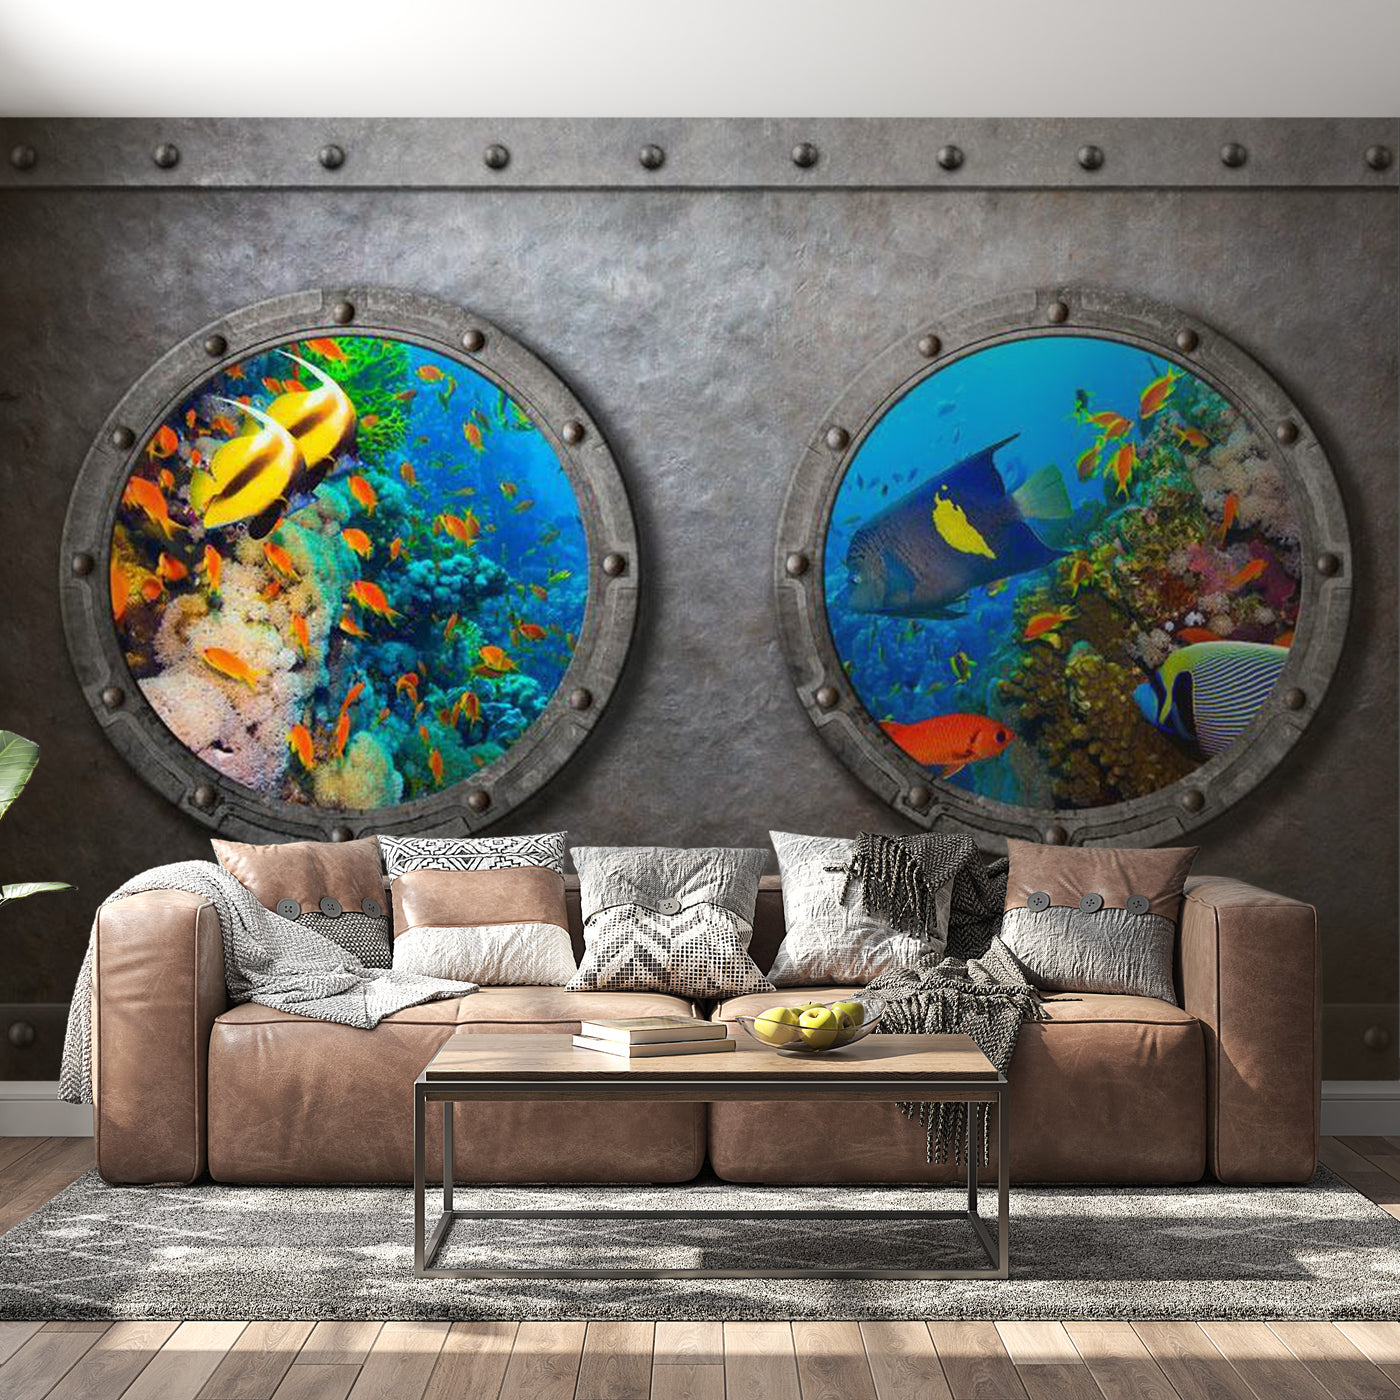 Peel & Stick Animal Wall Mural - Submarine Window Underwater World - Removable Wall Decals